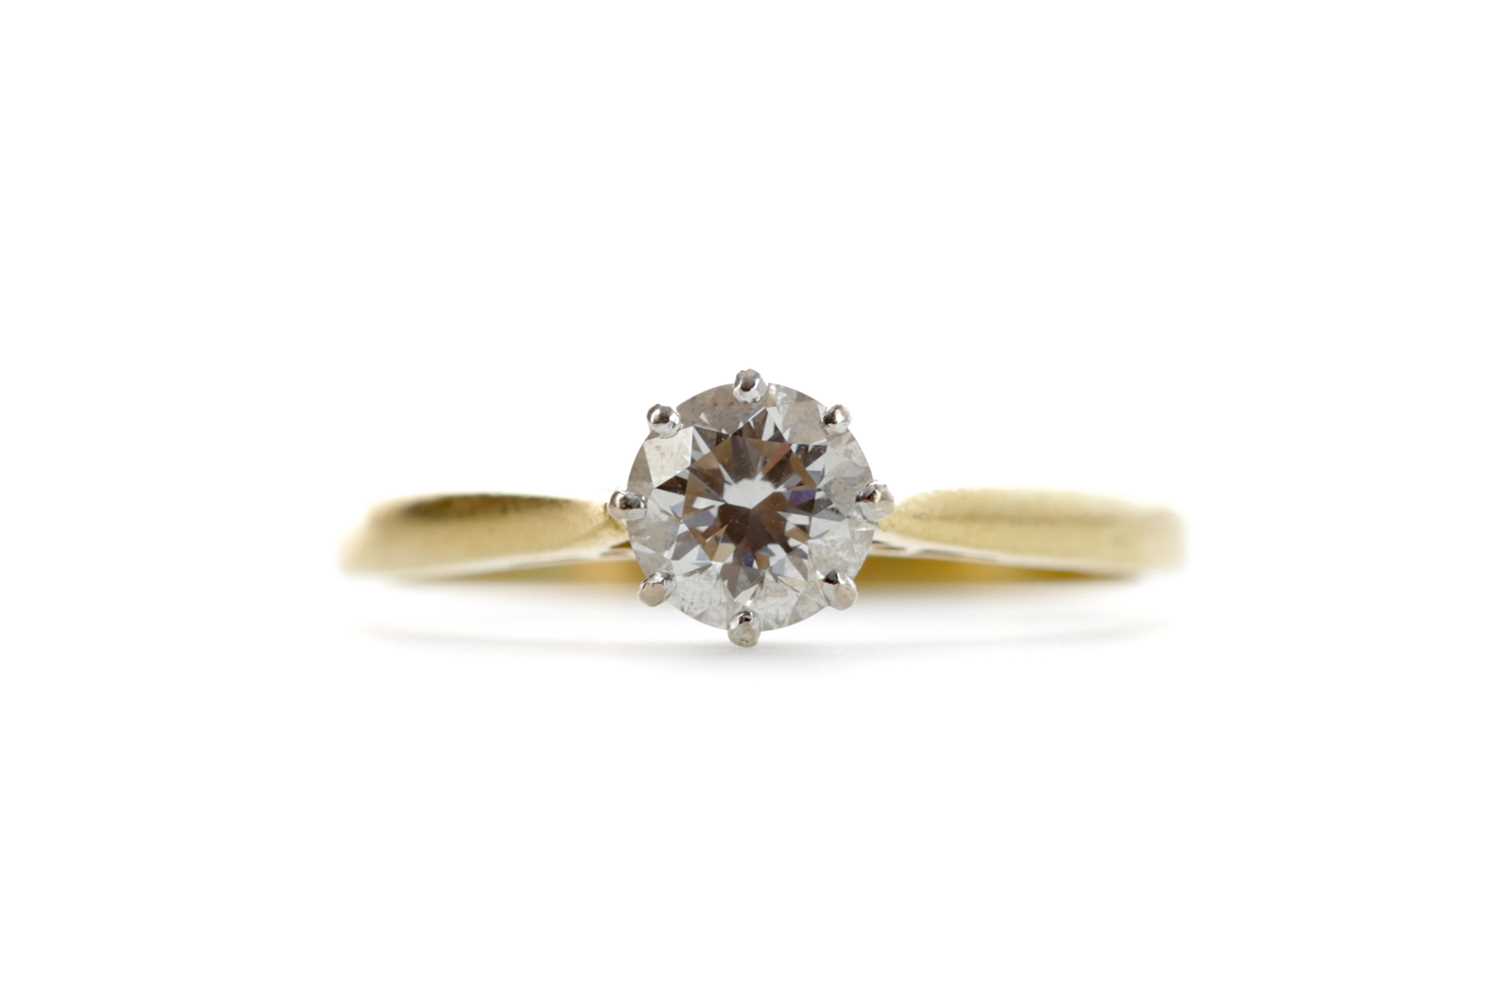 Lot 398 - A DIAMOND SOLITAIRE RING